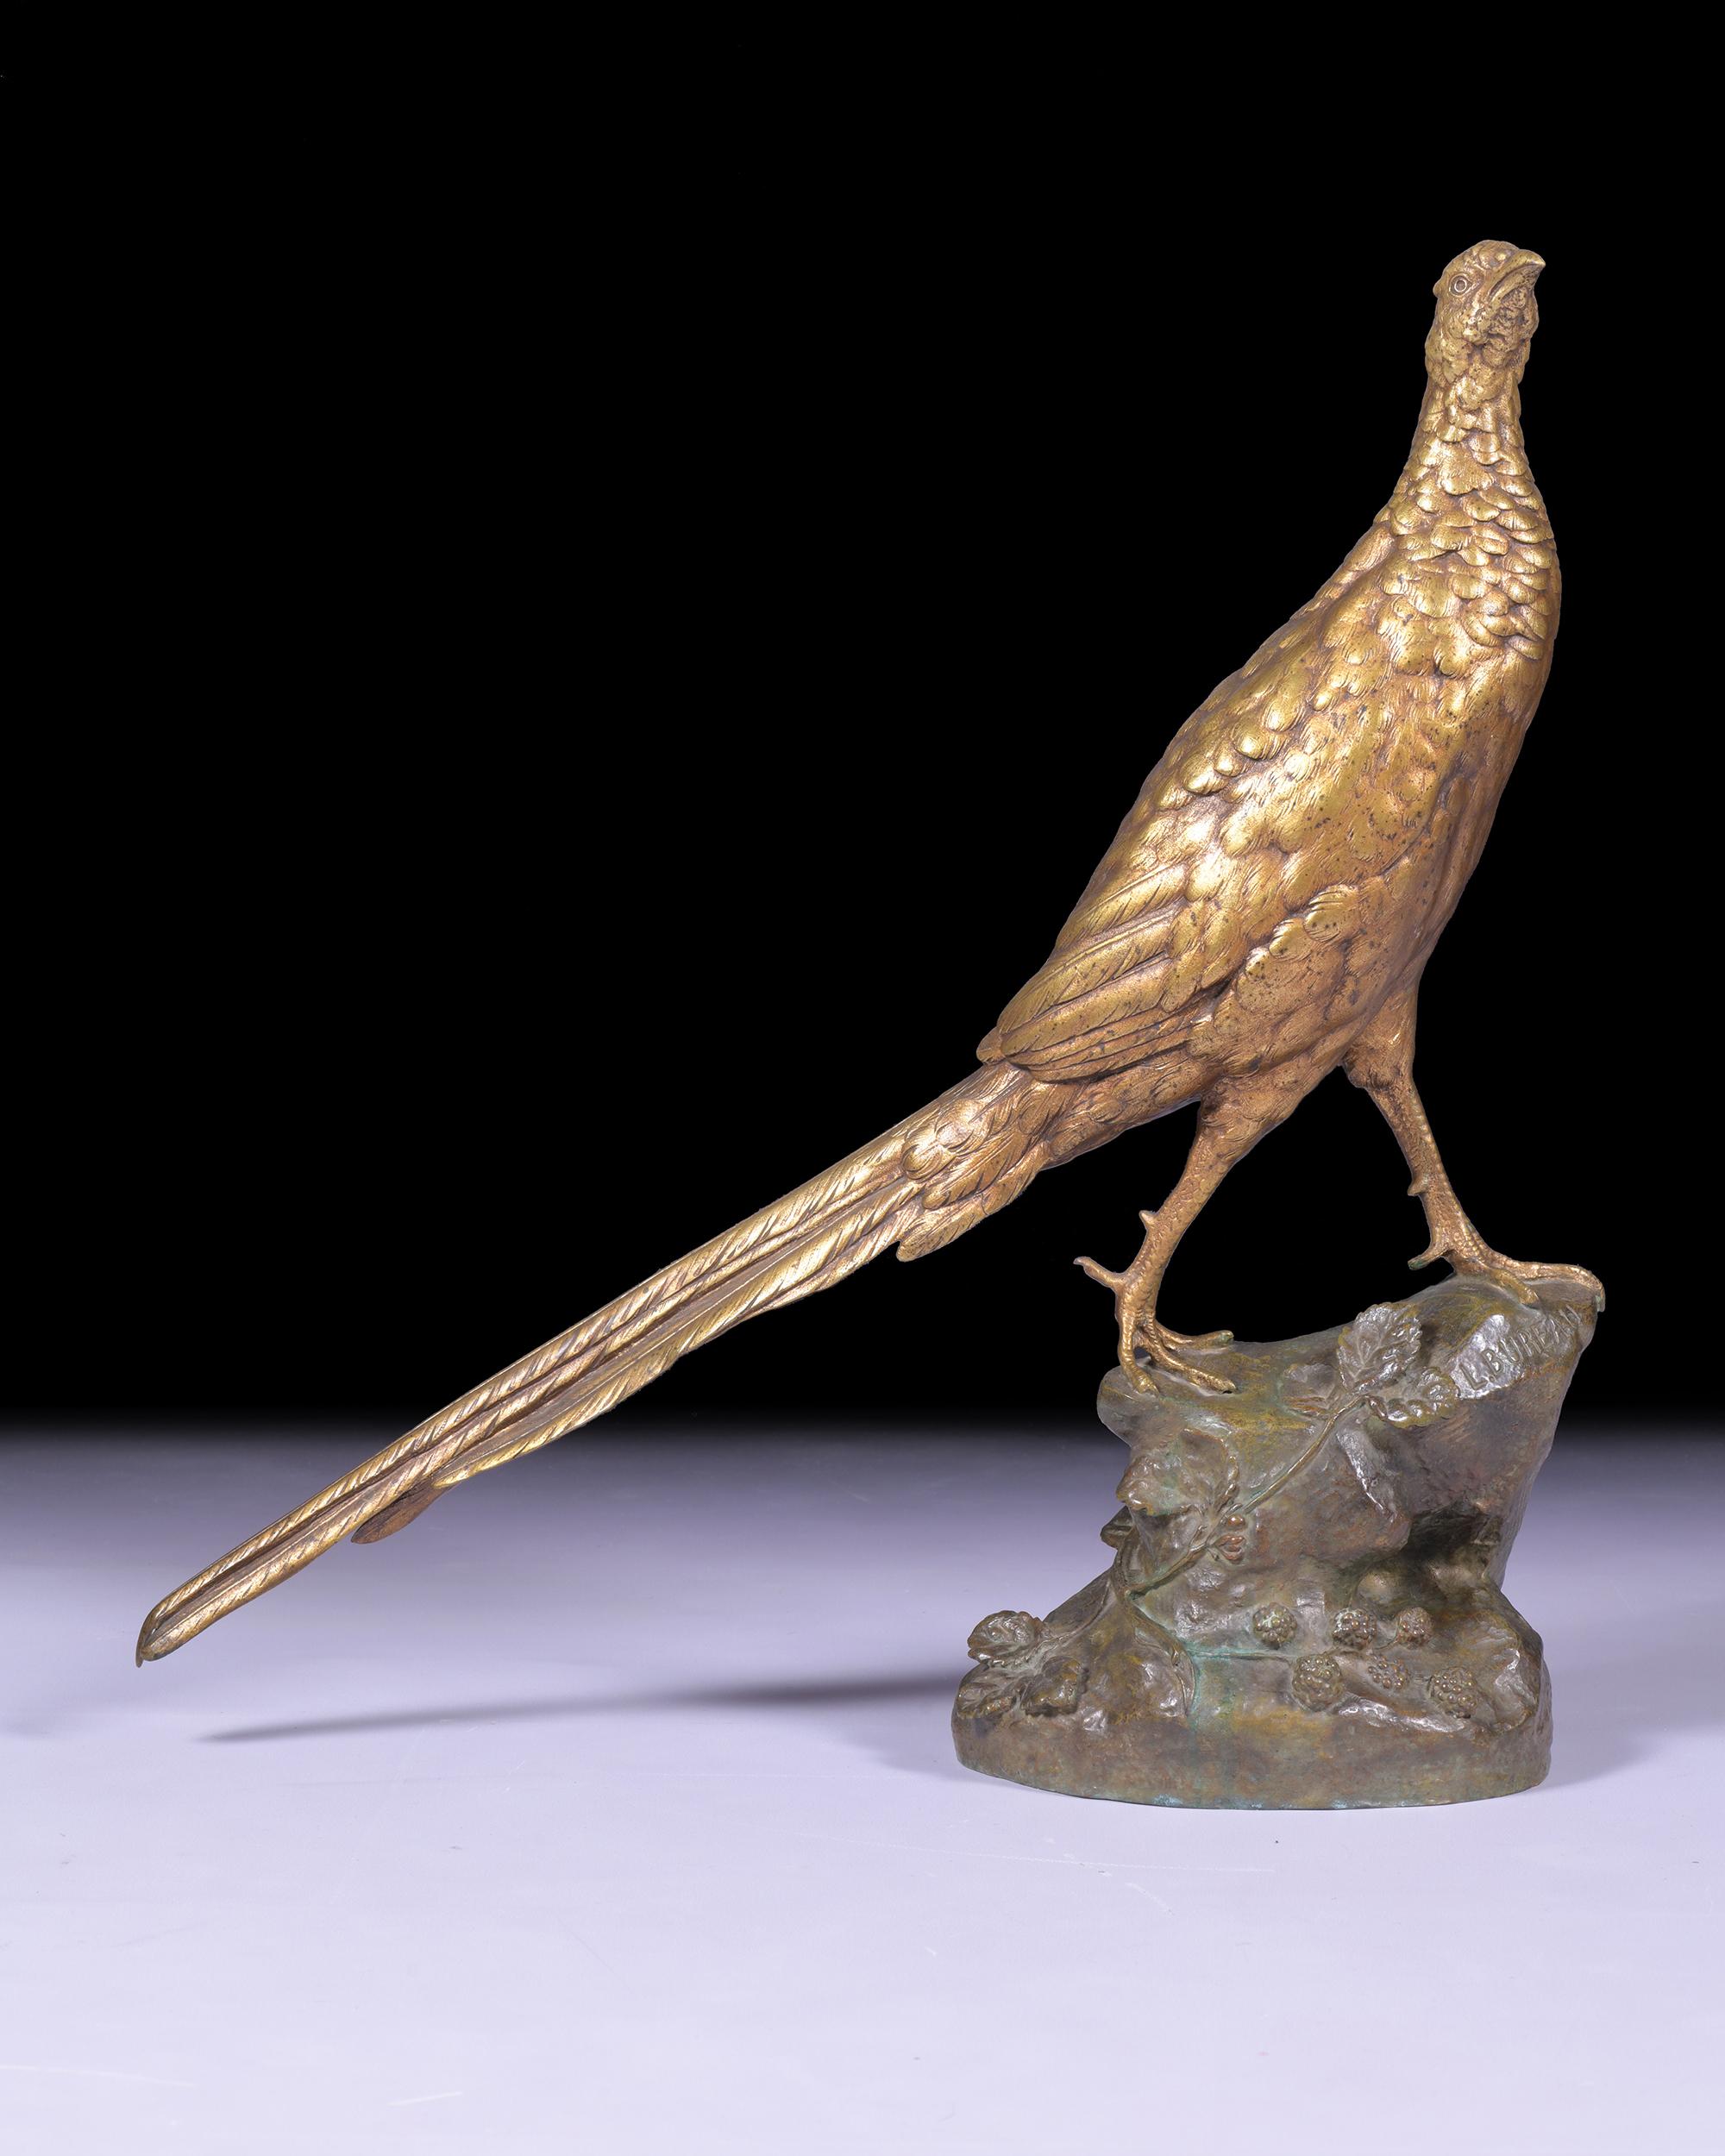 A very fine and opposing bronze sculpture of a Pheasant by Léon Bureau (1866-1906), the life-size figure with fine pen drawing, gold patinated bronze on floral terrain base, signed in the casting, stamp of ''Société des Bronzes de Paris''.

H: 22